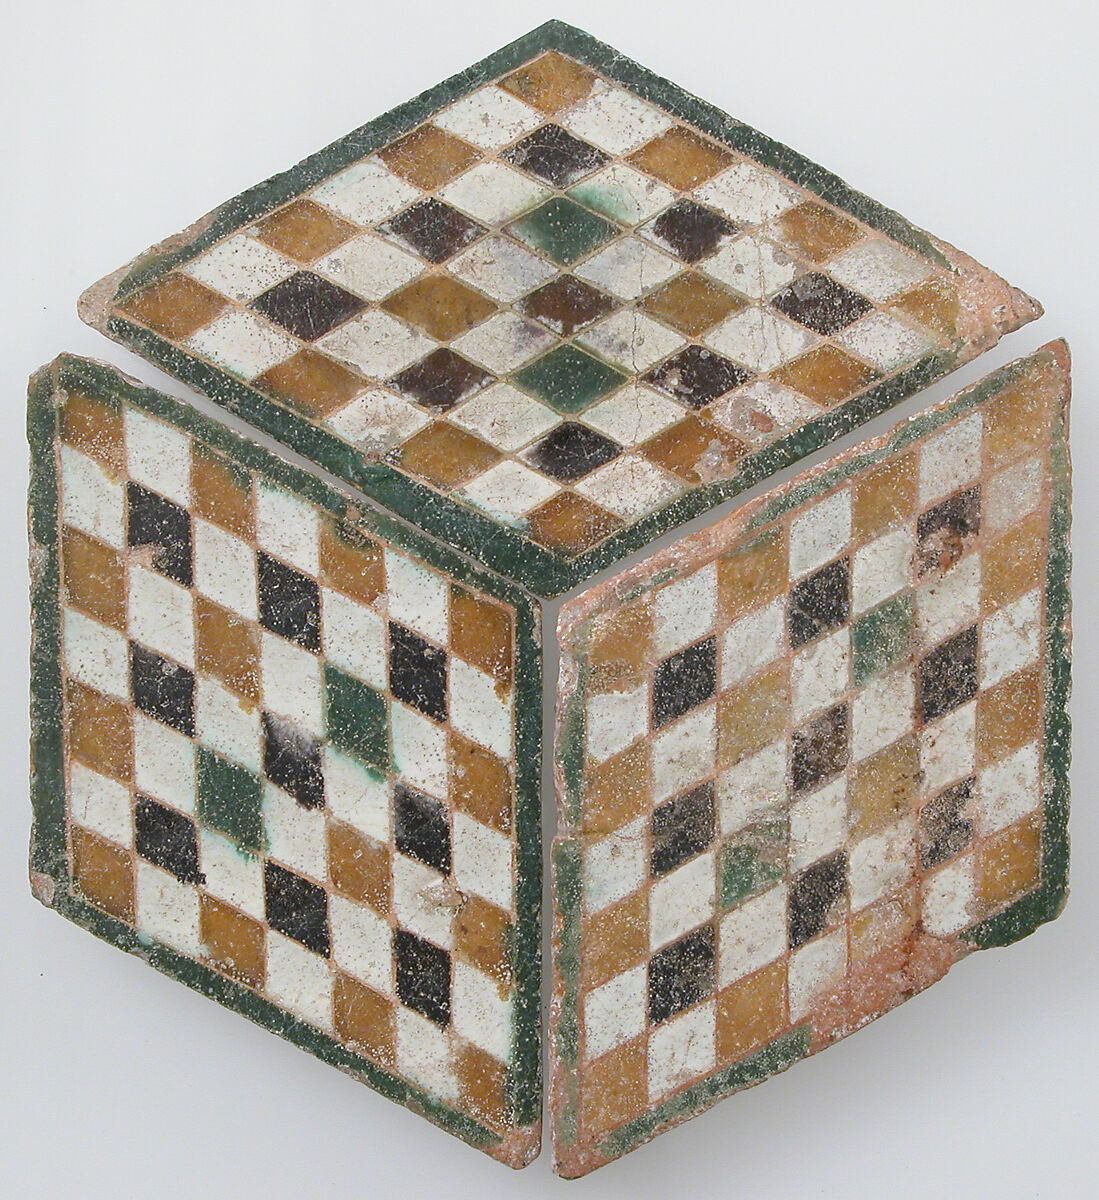 Tiles with Checkered Pattern, Tin-glazed earthenware, Spanish 